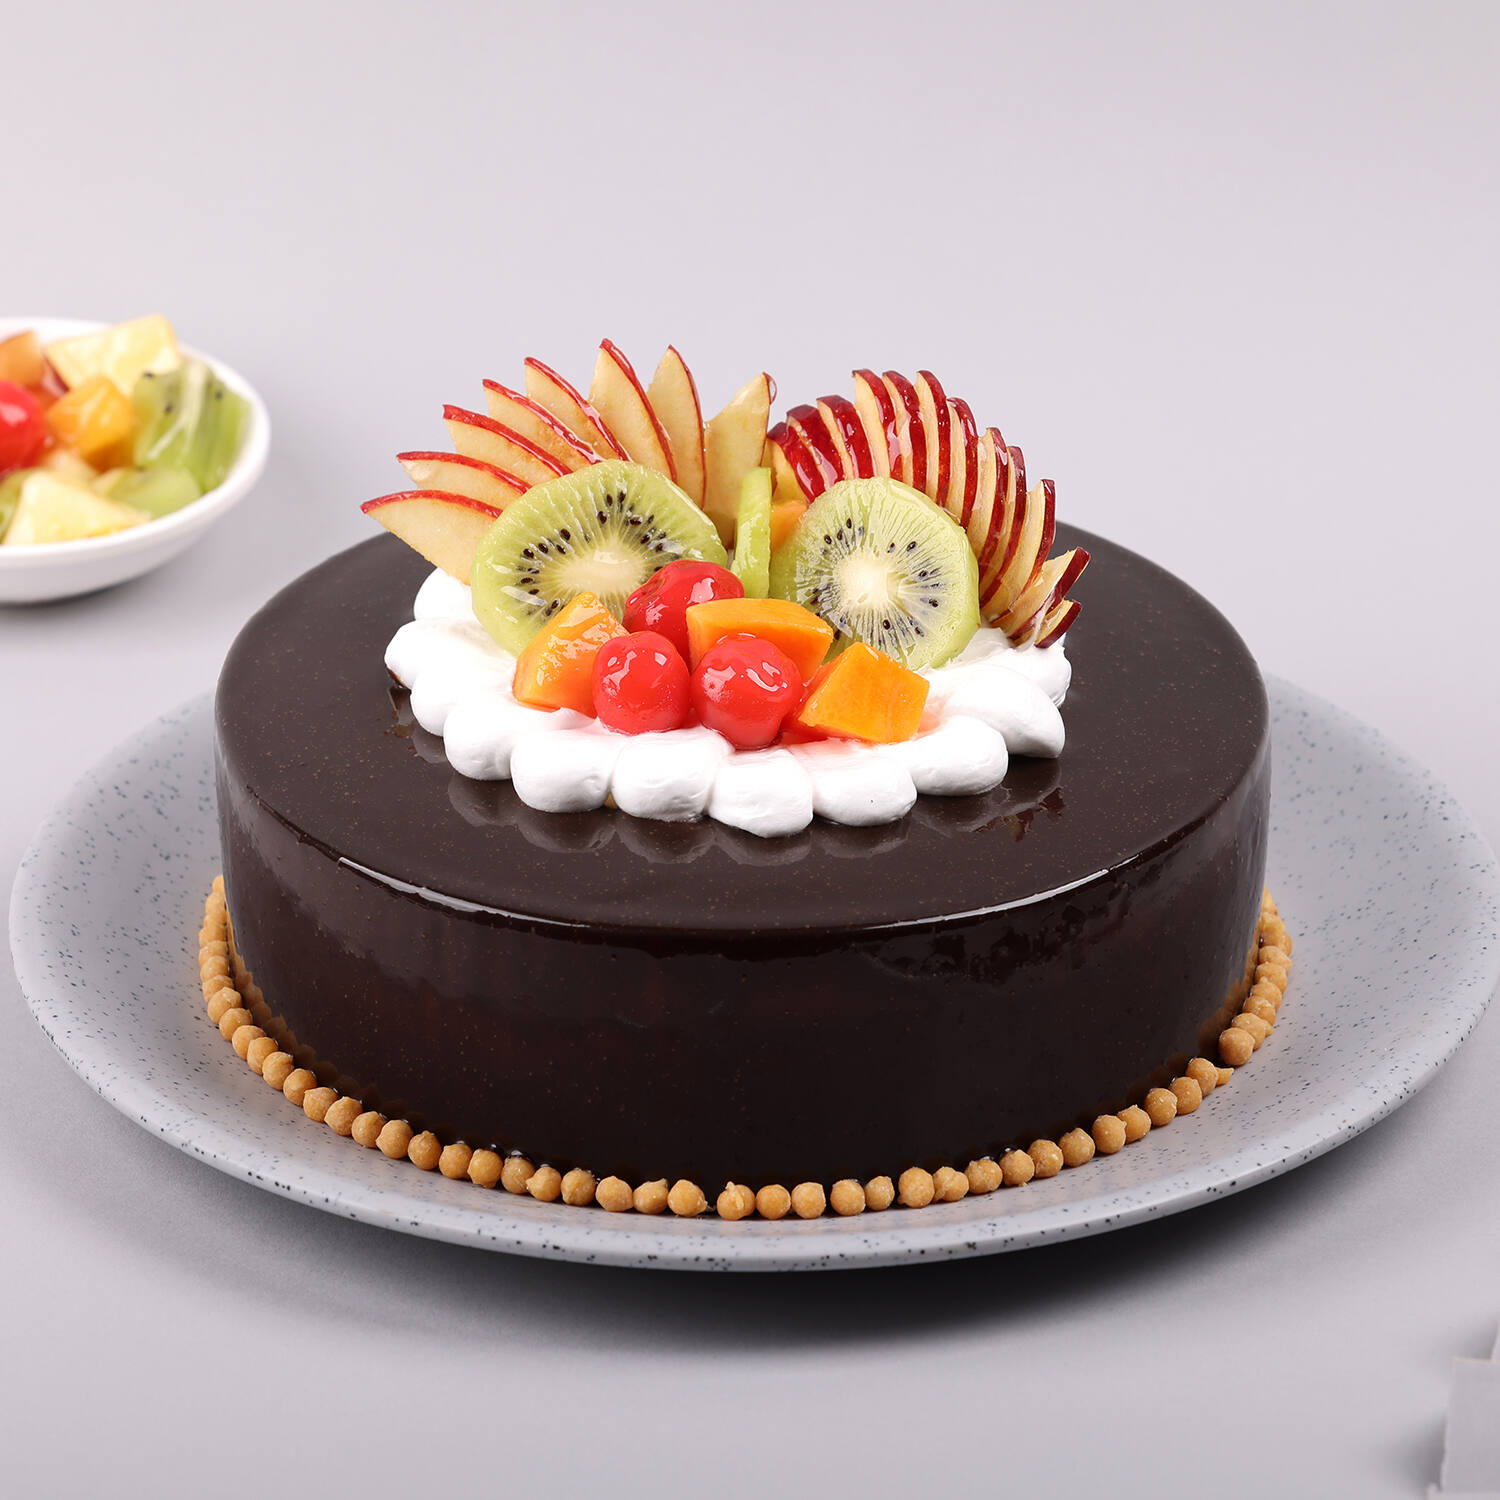 Winni in Mumbai - Best Online Cake Delivery Services in Mumbai - Justdial